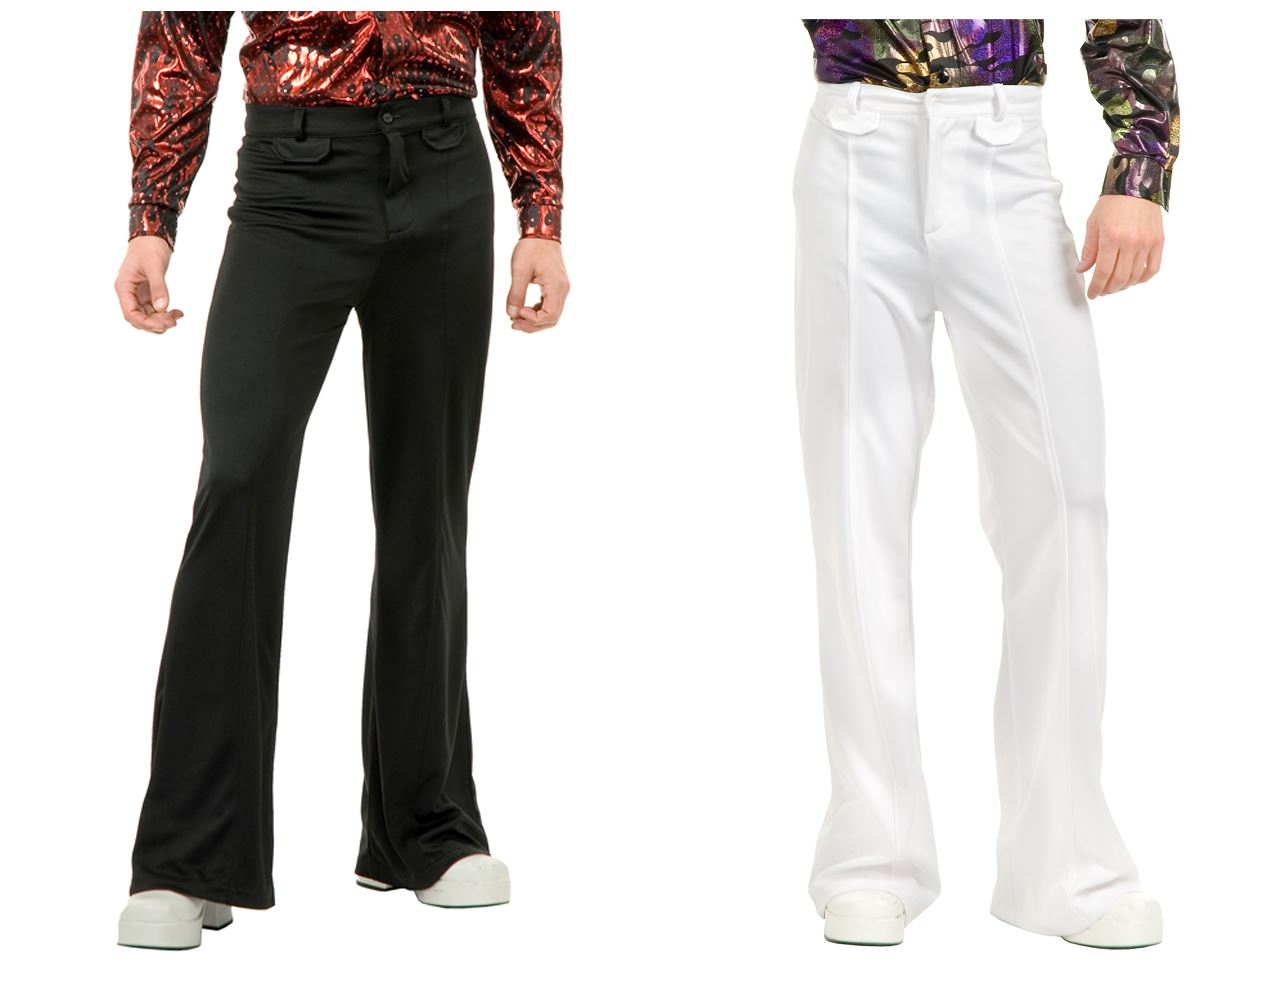 Disco Pants Men's Costume by Charades - CostumeVille